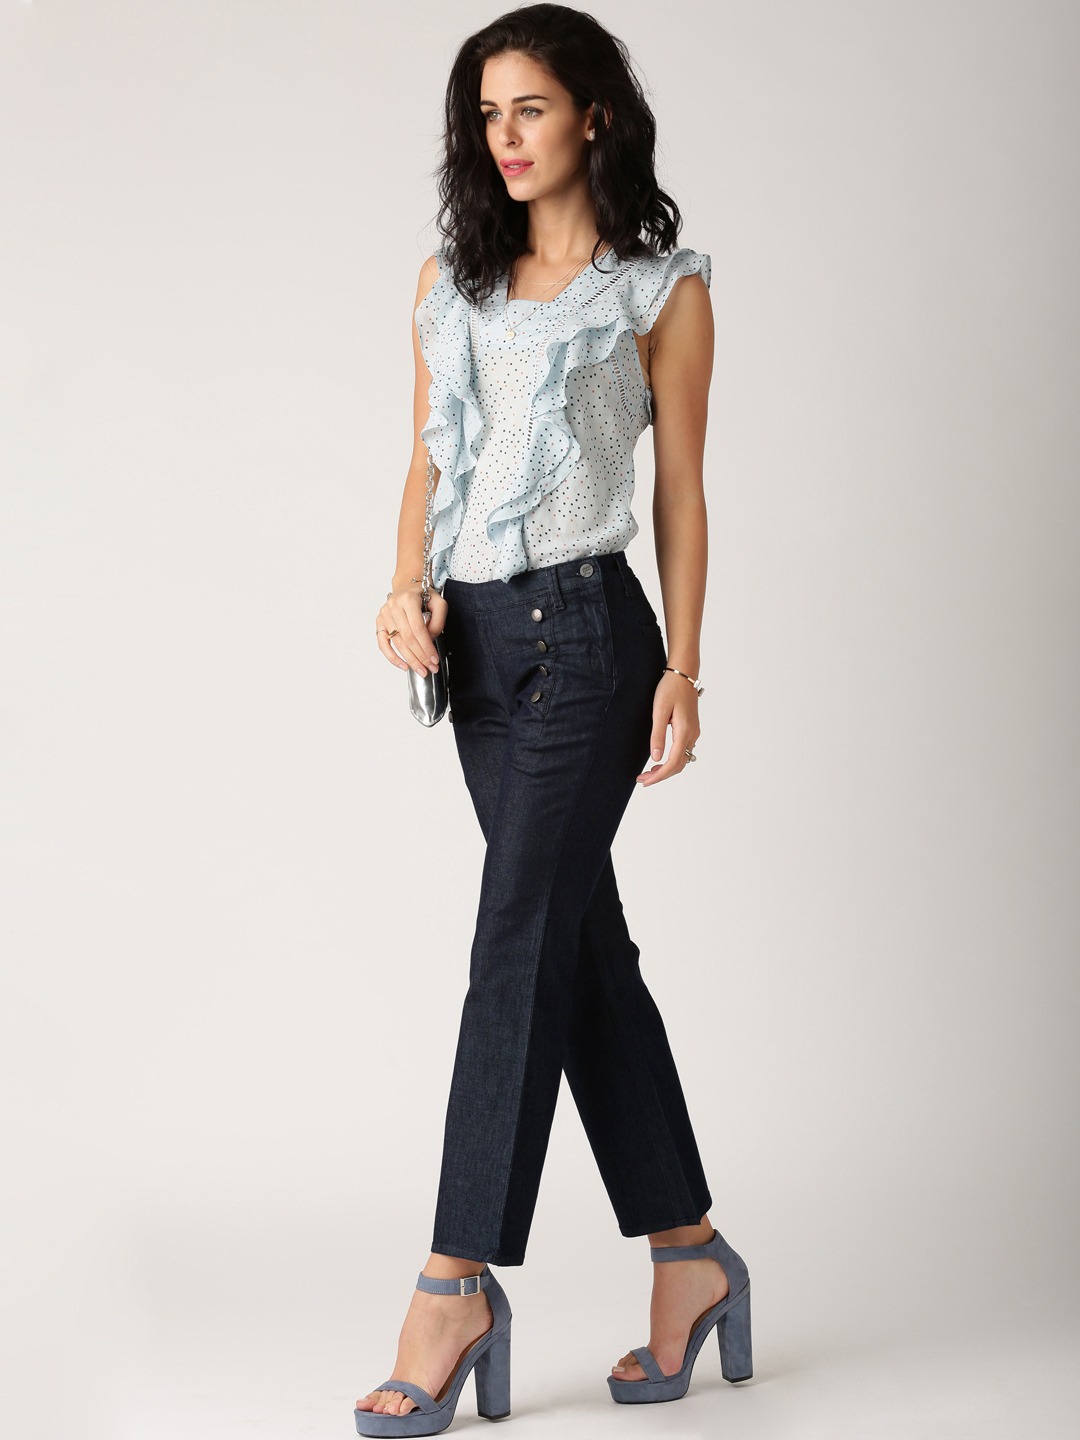 Bootcut Jeans - Buy Bootcut Jeans online in India